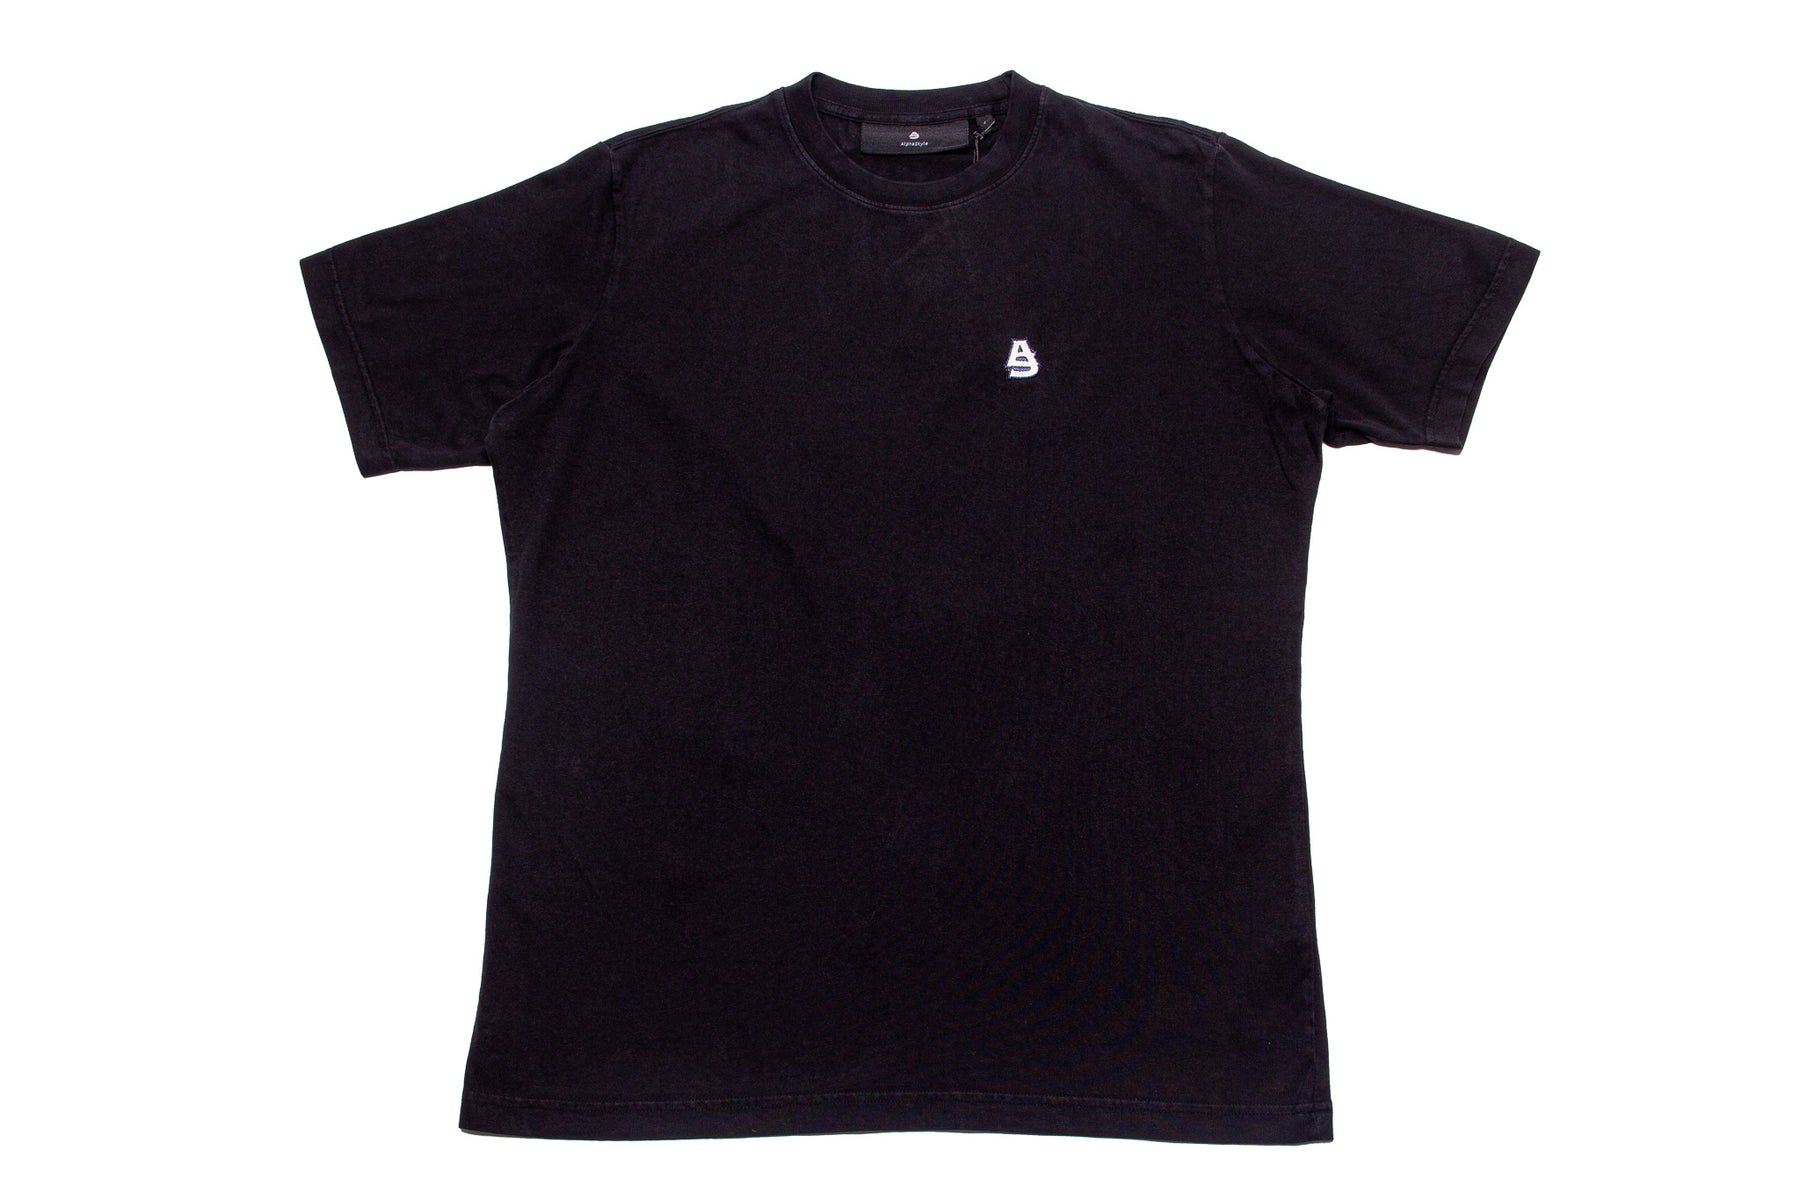 AlphaStyle Onaway Embroidery Tee "Black"